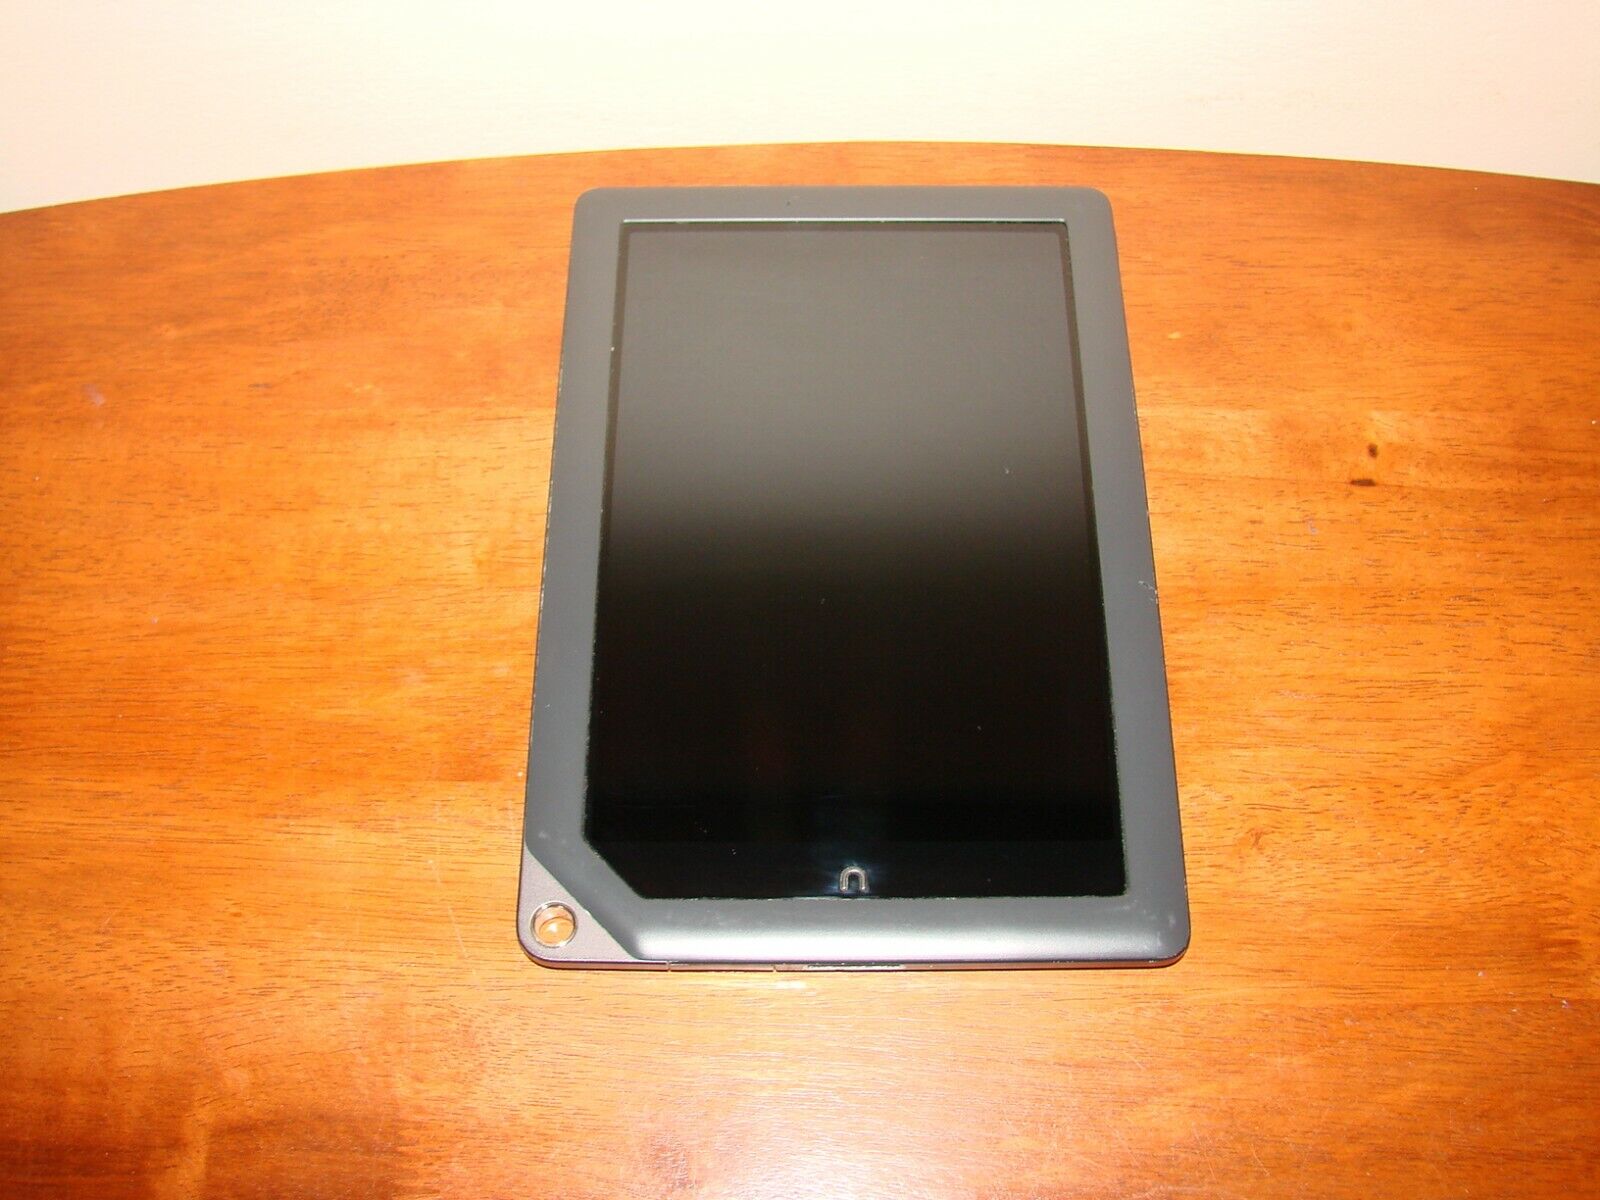 Barnes & Noble BNTV600A Nook Tablet - Not Working - AS-IS